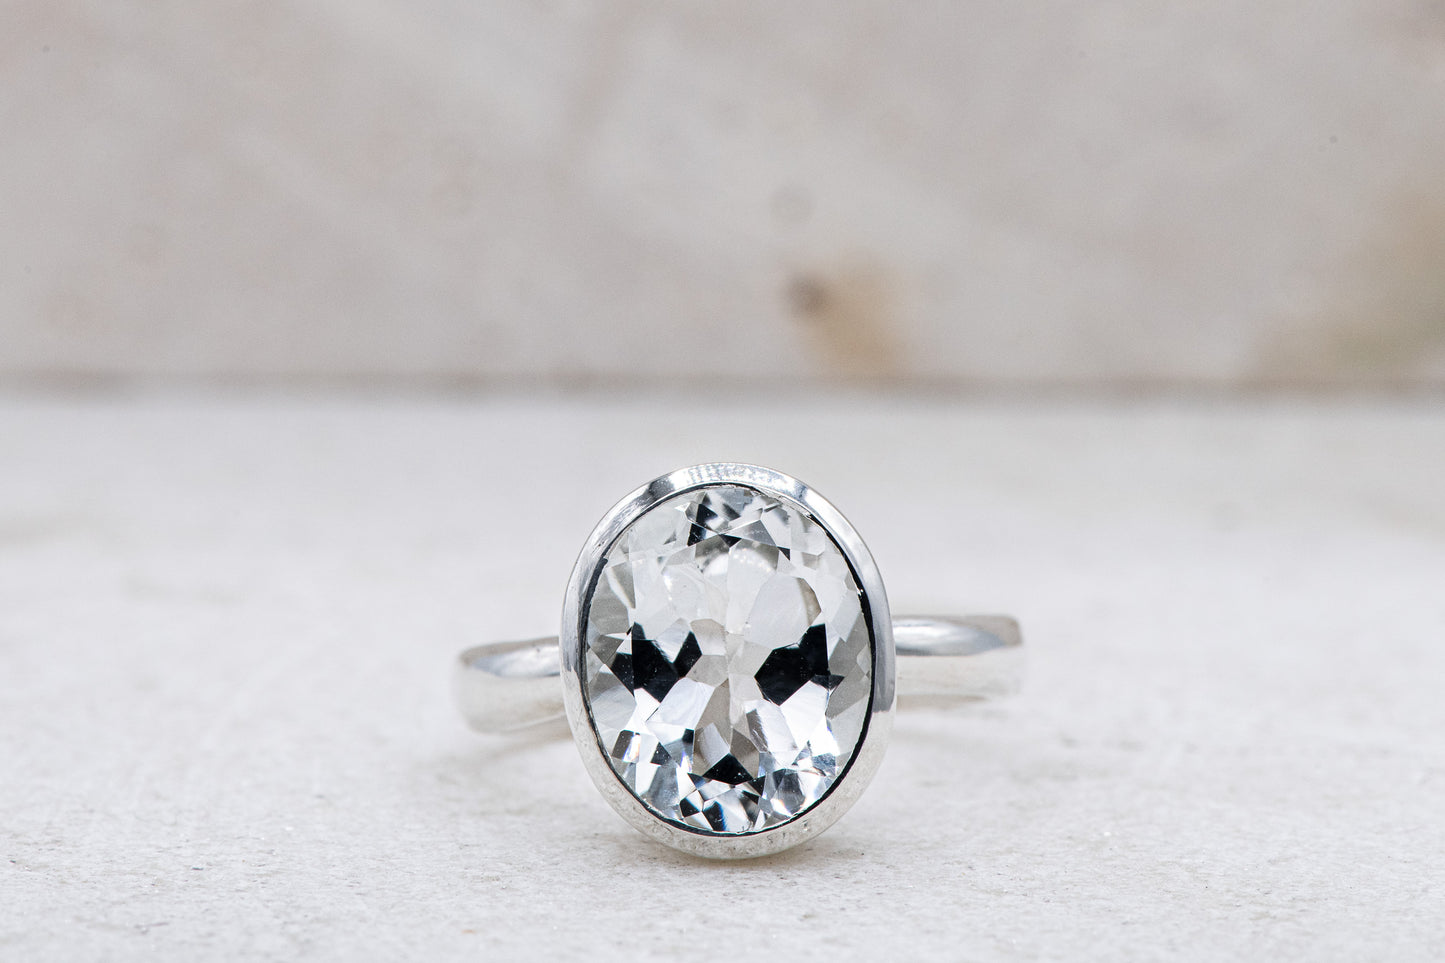 A Size 6.5 Handcrafted White Topaz Ring in Sterling Silver, Recycled Silver, Eco Friendly, Gemstone RIng by Cassin Jewelry